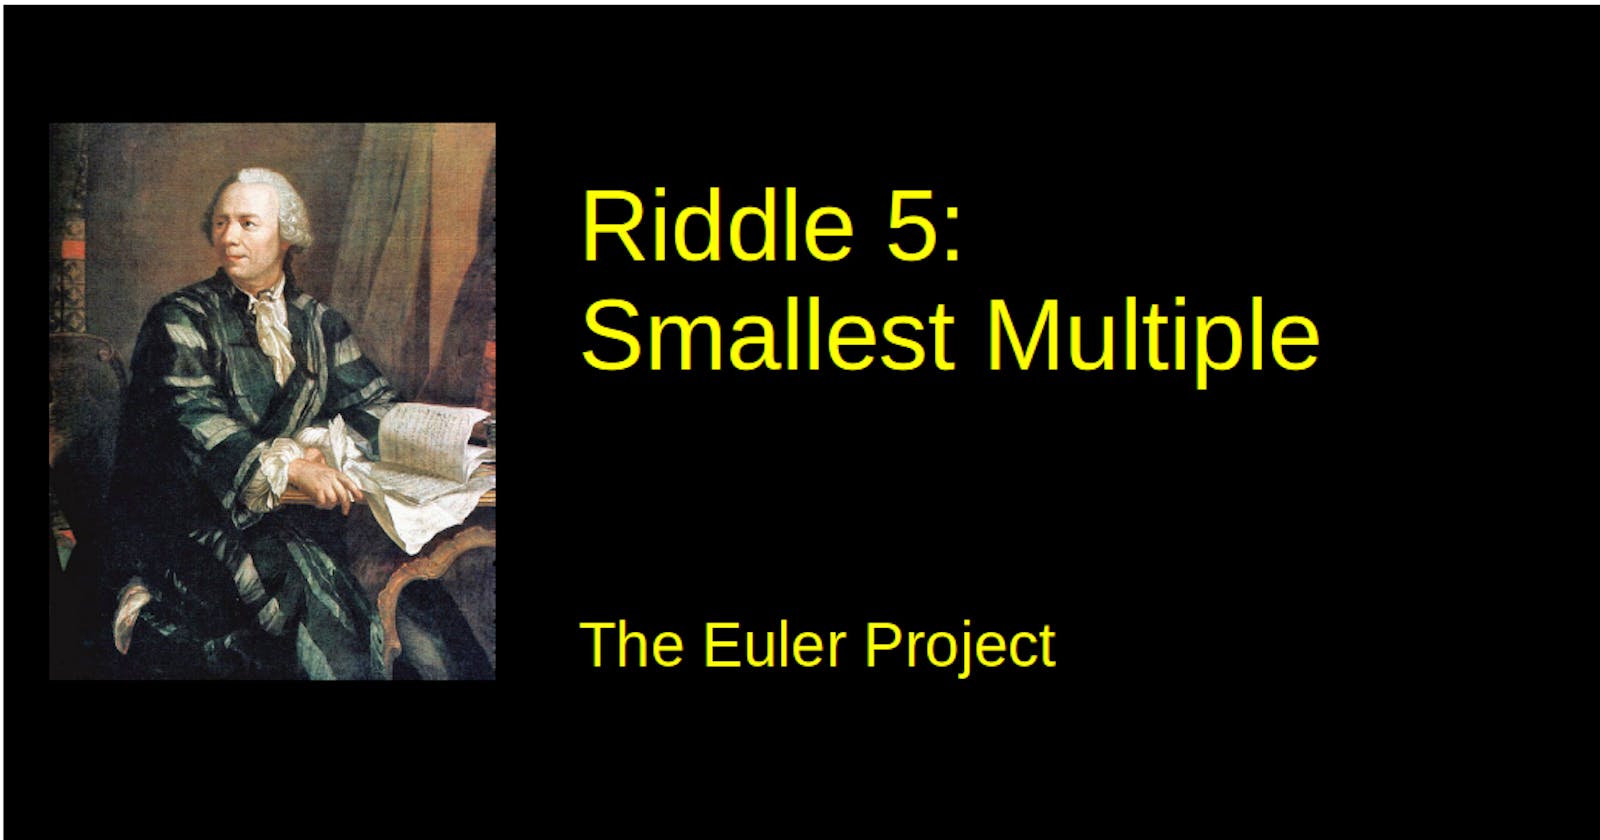 Riddle 5: Smallest Multiple